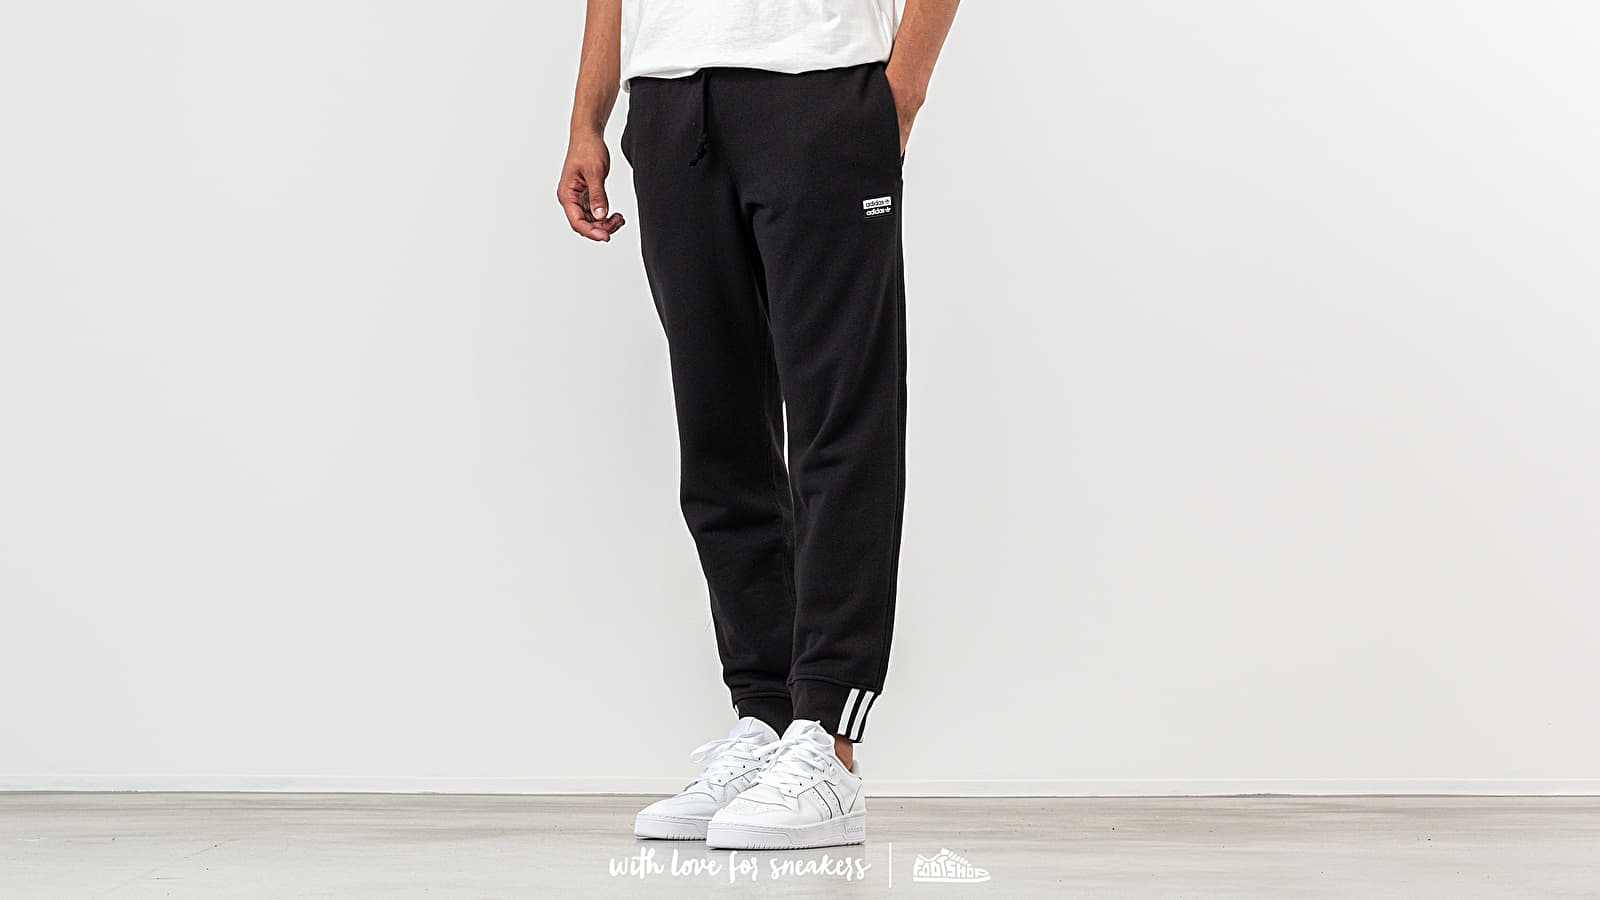 Pants and jeans adidas R.Y.V. Sweat Pants Black